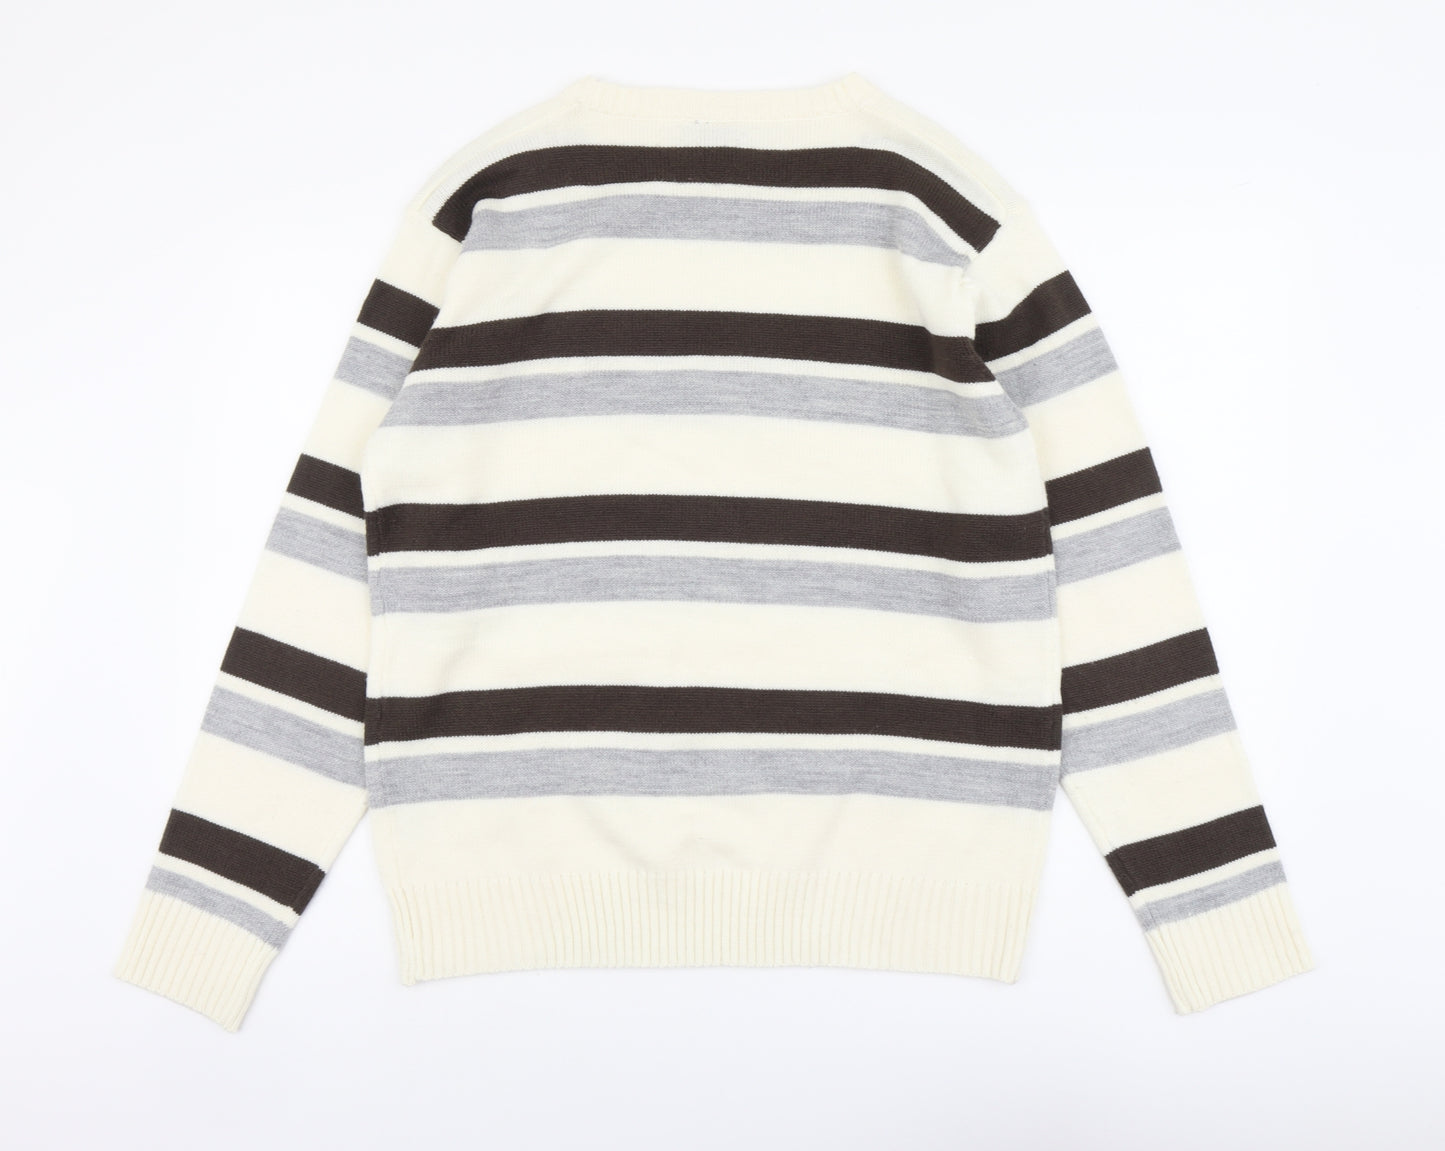 Jack & Danny's Mens Multicoloured Round Neck Striped Acrylic Pullover Jumper Size L Long Sleeve